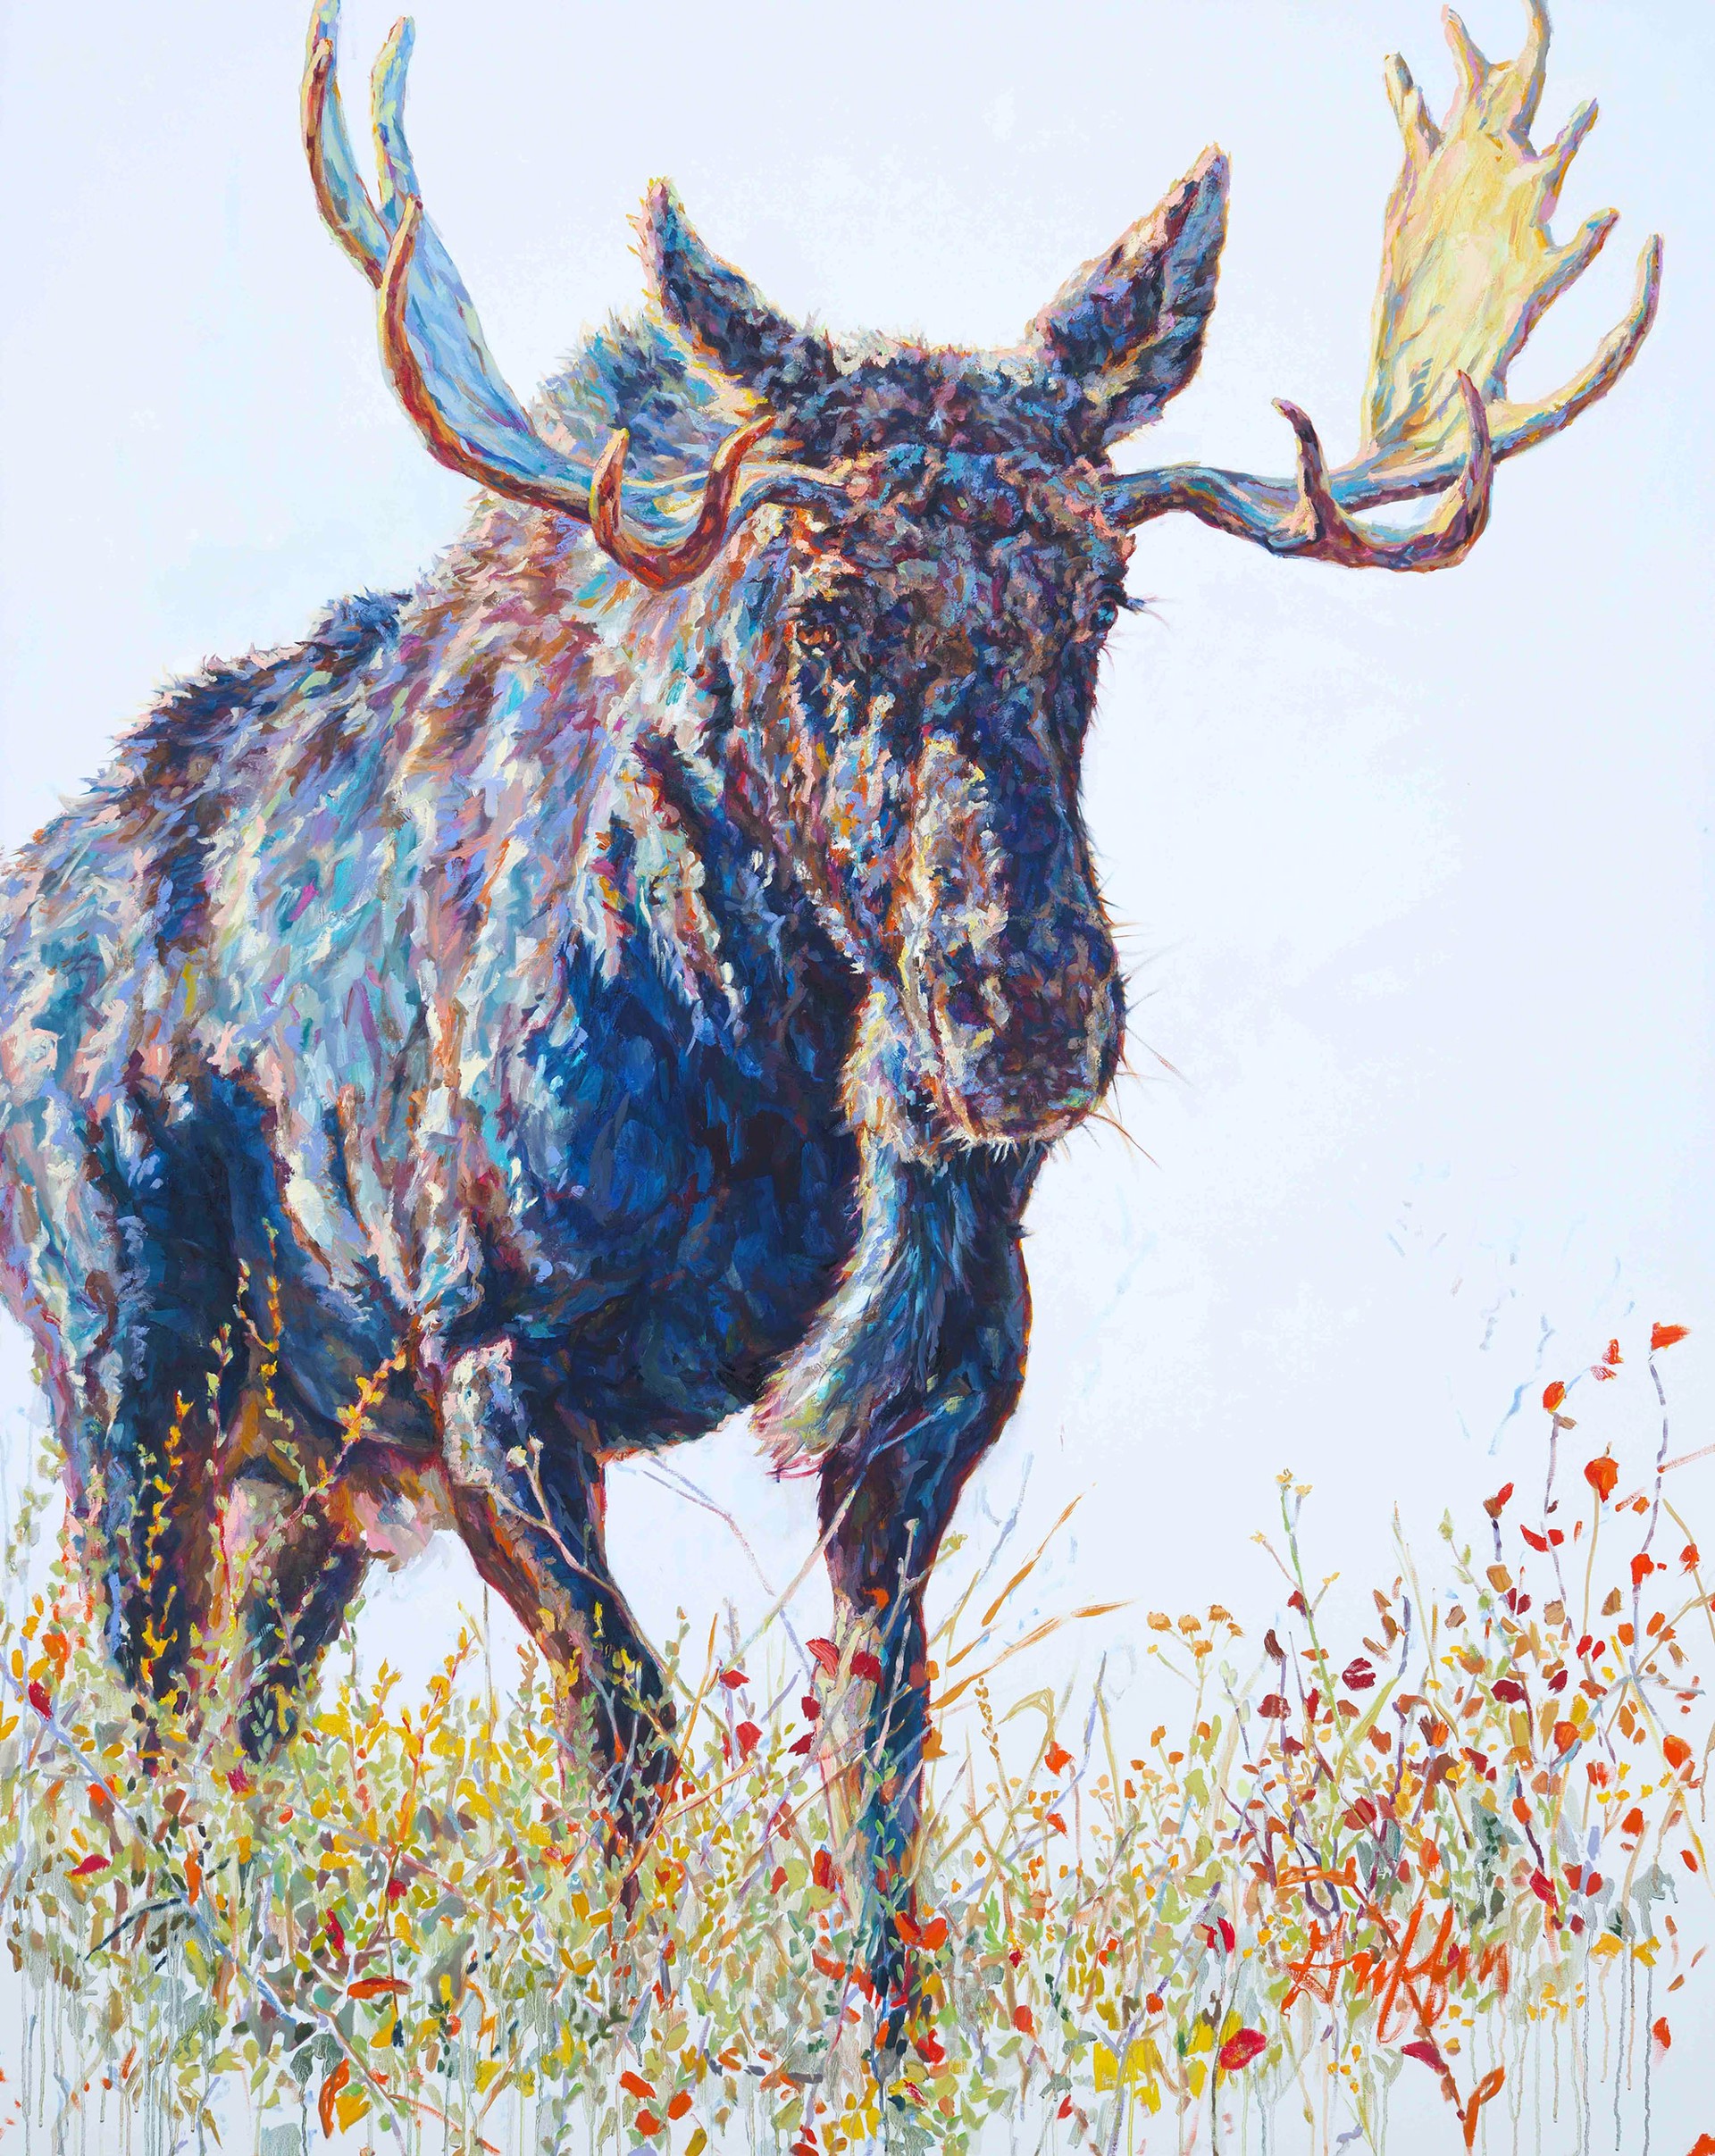 Original Oil Painting Featuring Male Moose On White Background With Impressionist Style Wild Flowers